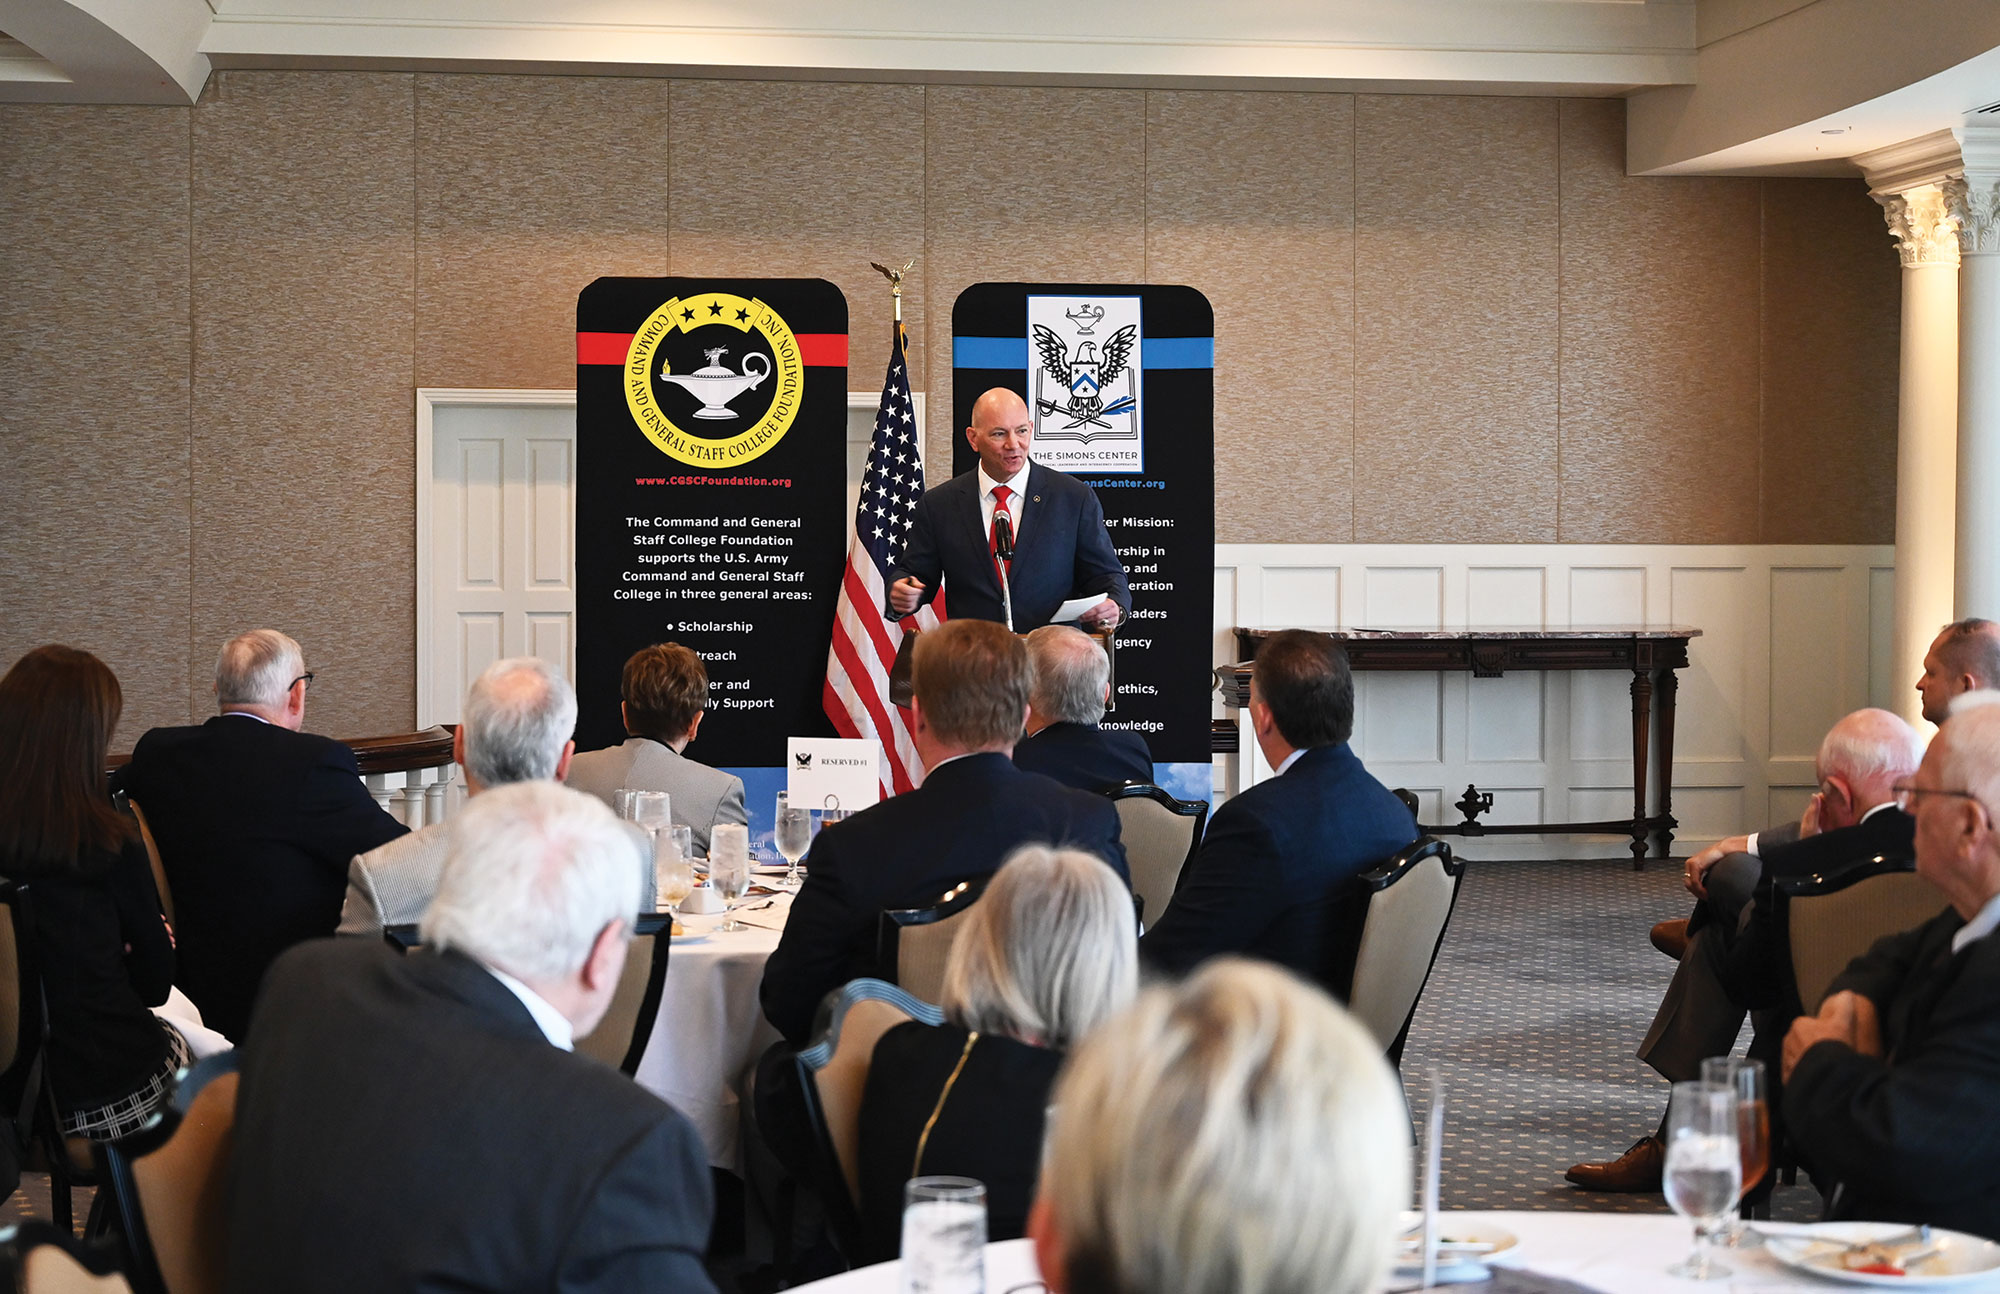 Lt. Col. (Ret.) John J. Nelson delivers his presentation on Counter Human Trafficking in the U.S. during the Arter-Rowland National Security Forum Oct. 14, 2021, at the Carriage Club in Kansas City.